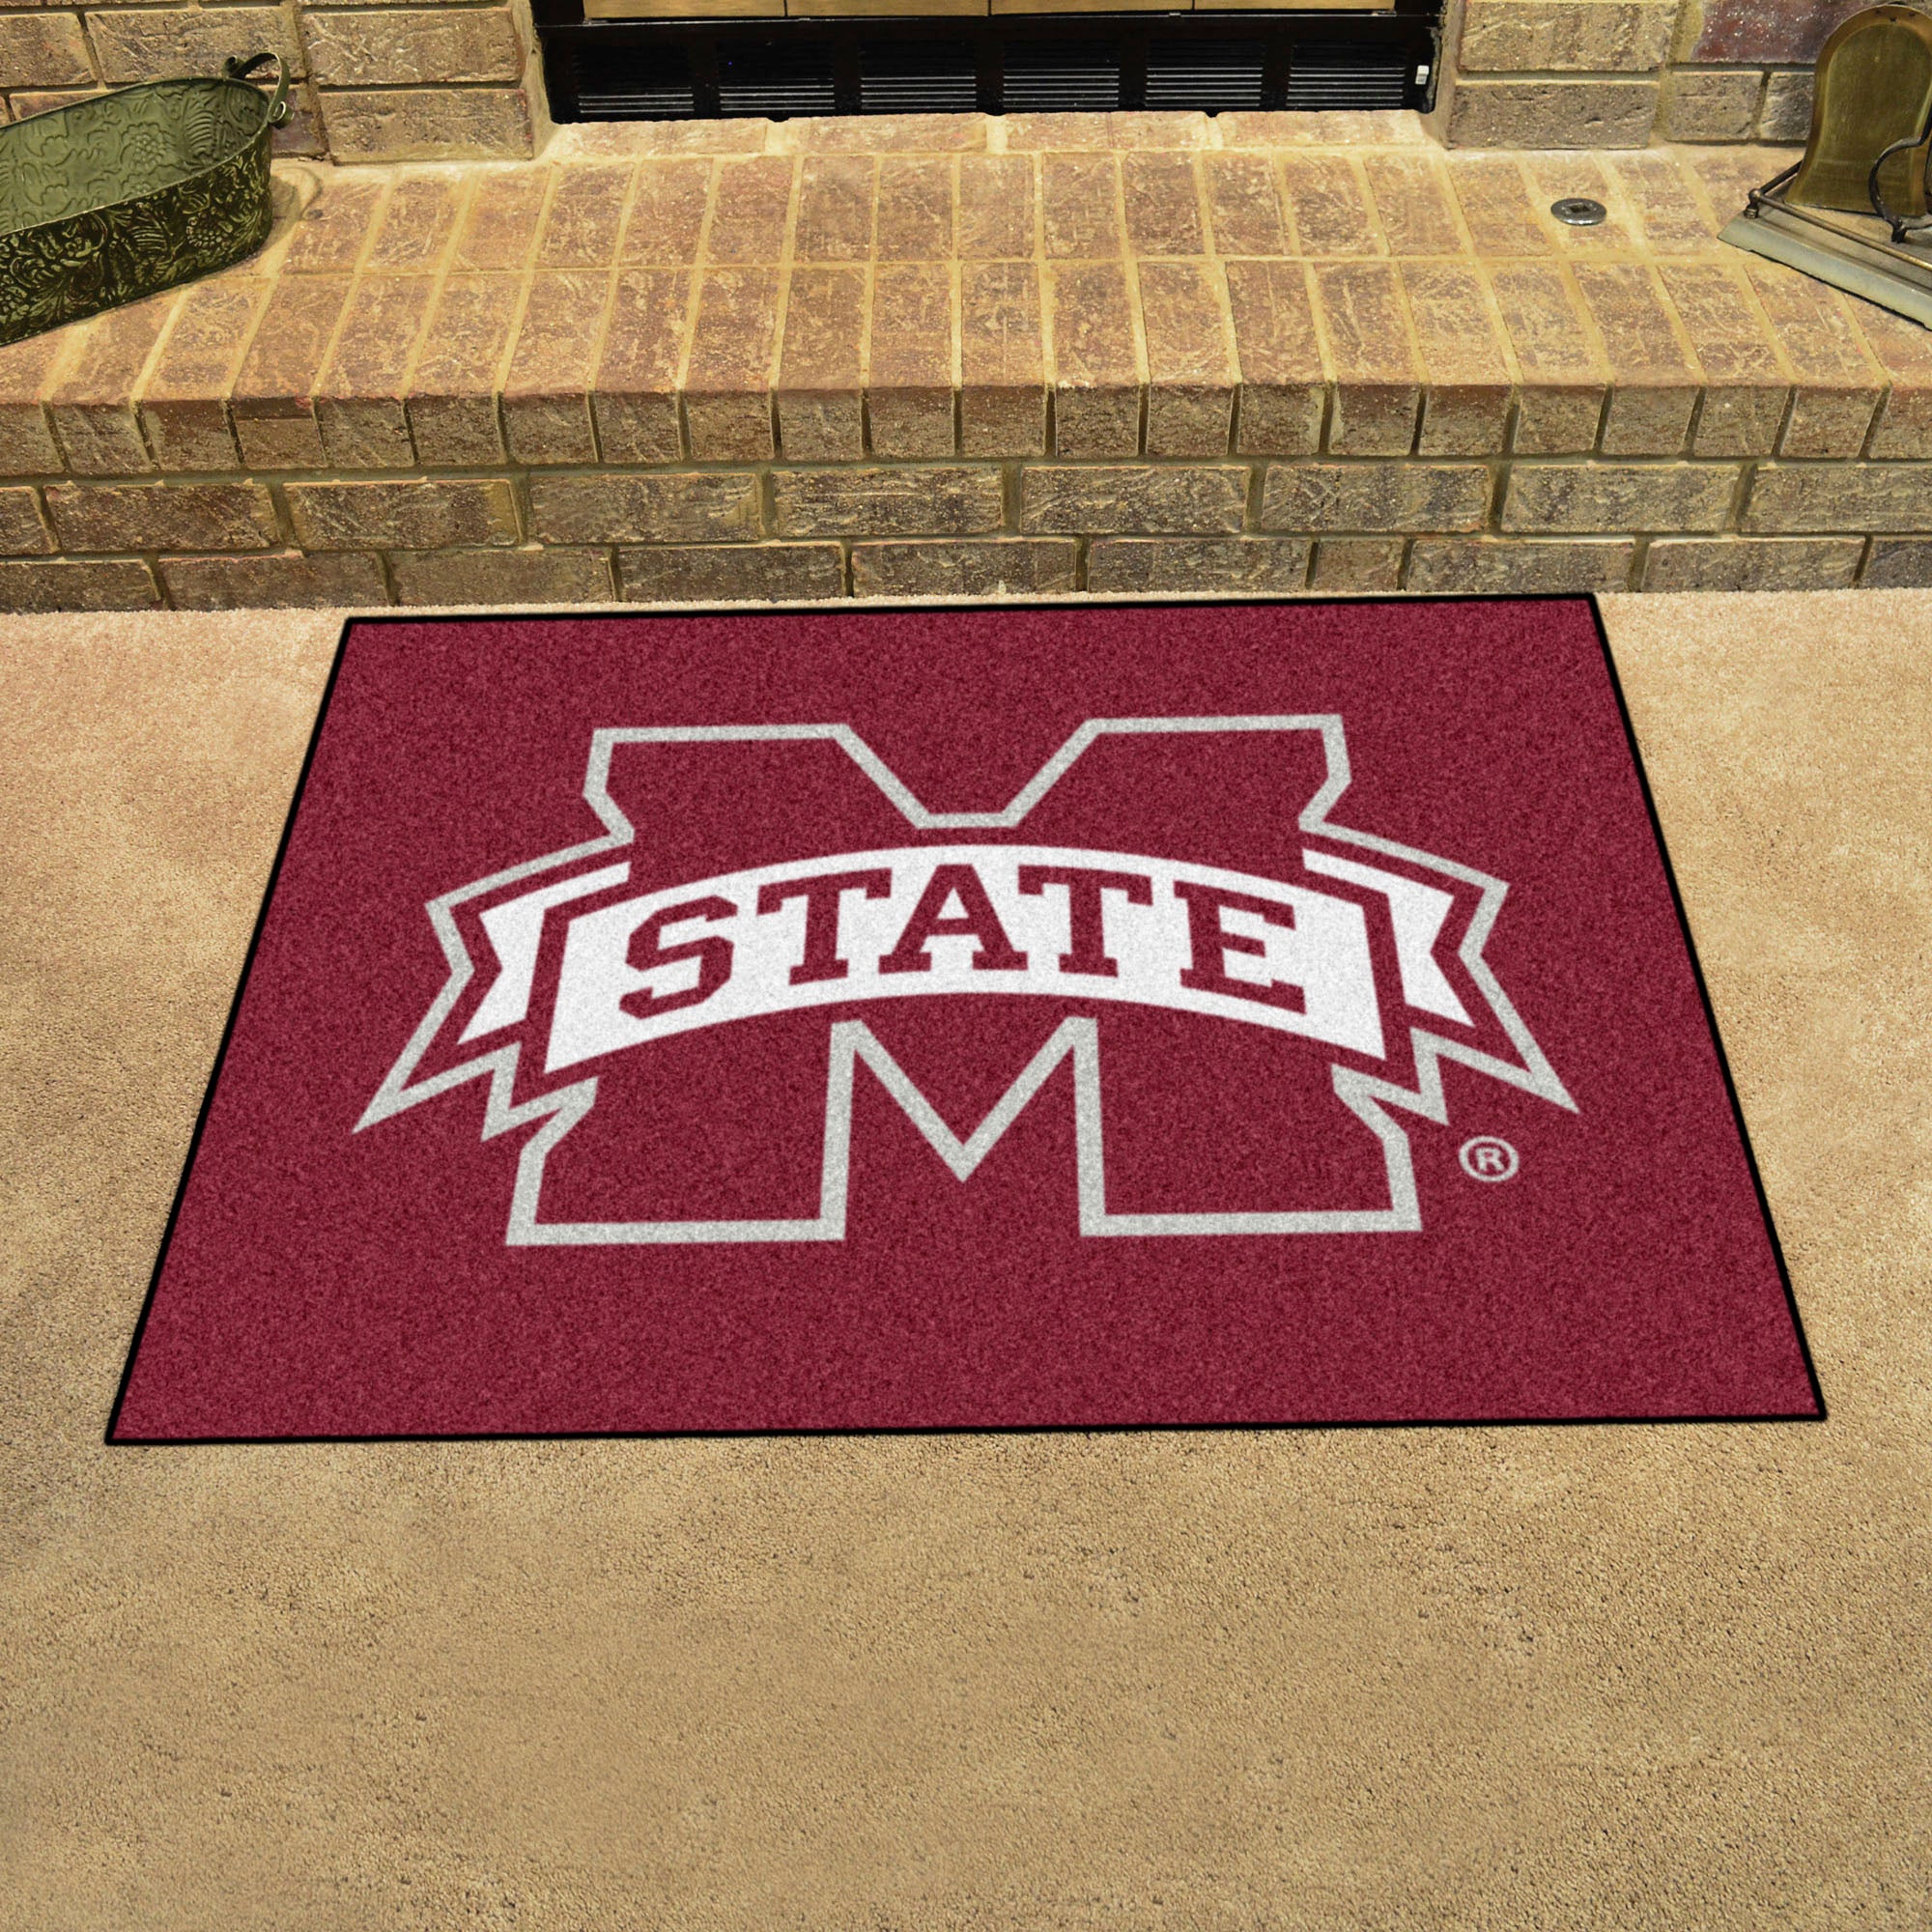 FANMATS, Mississippi State University Rug - 34 in. x 42.5 in.